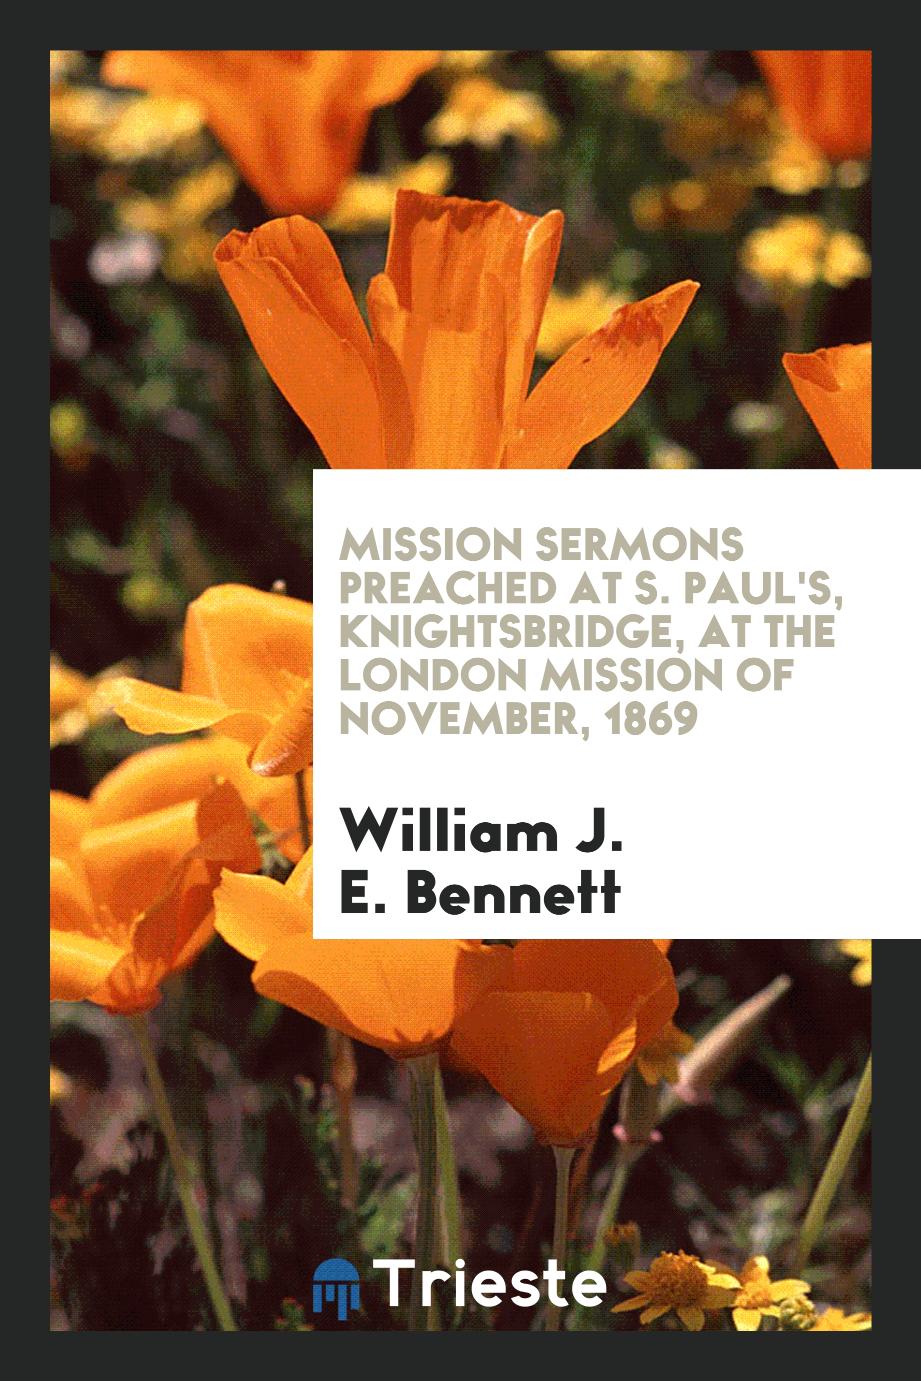 Mission Sermons Preached at S. Paul's, Knightsbridge, at the London Mission of November, 1869